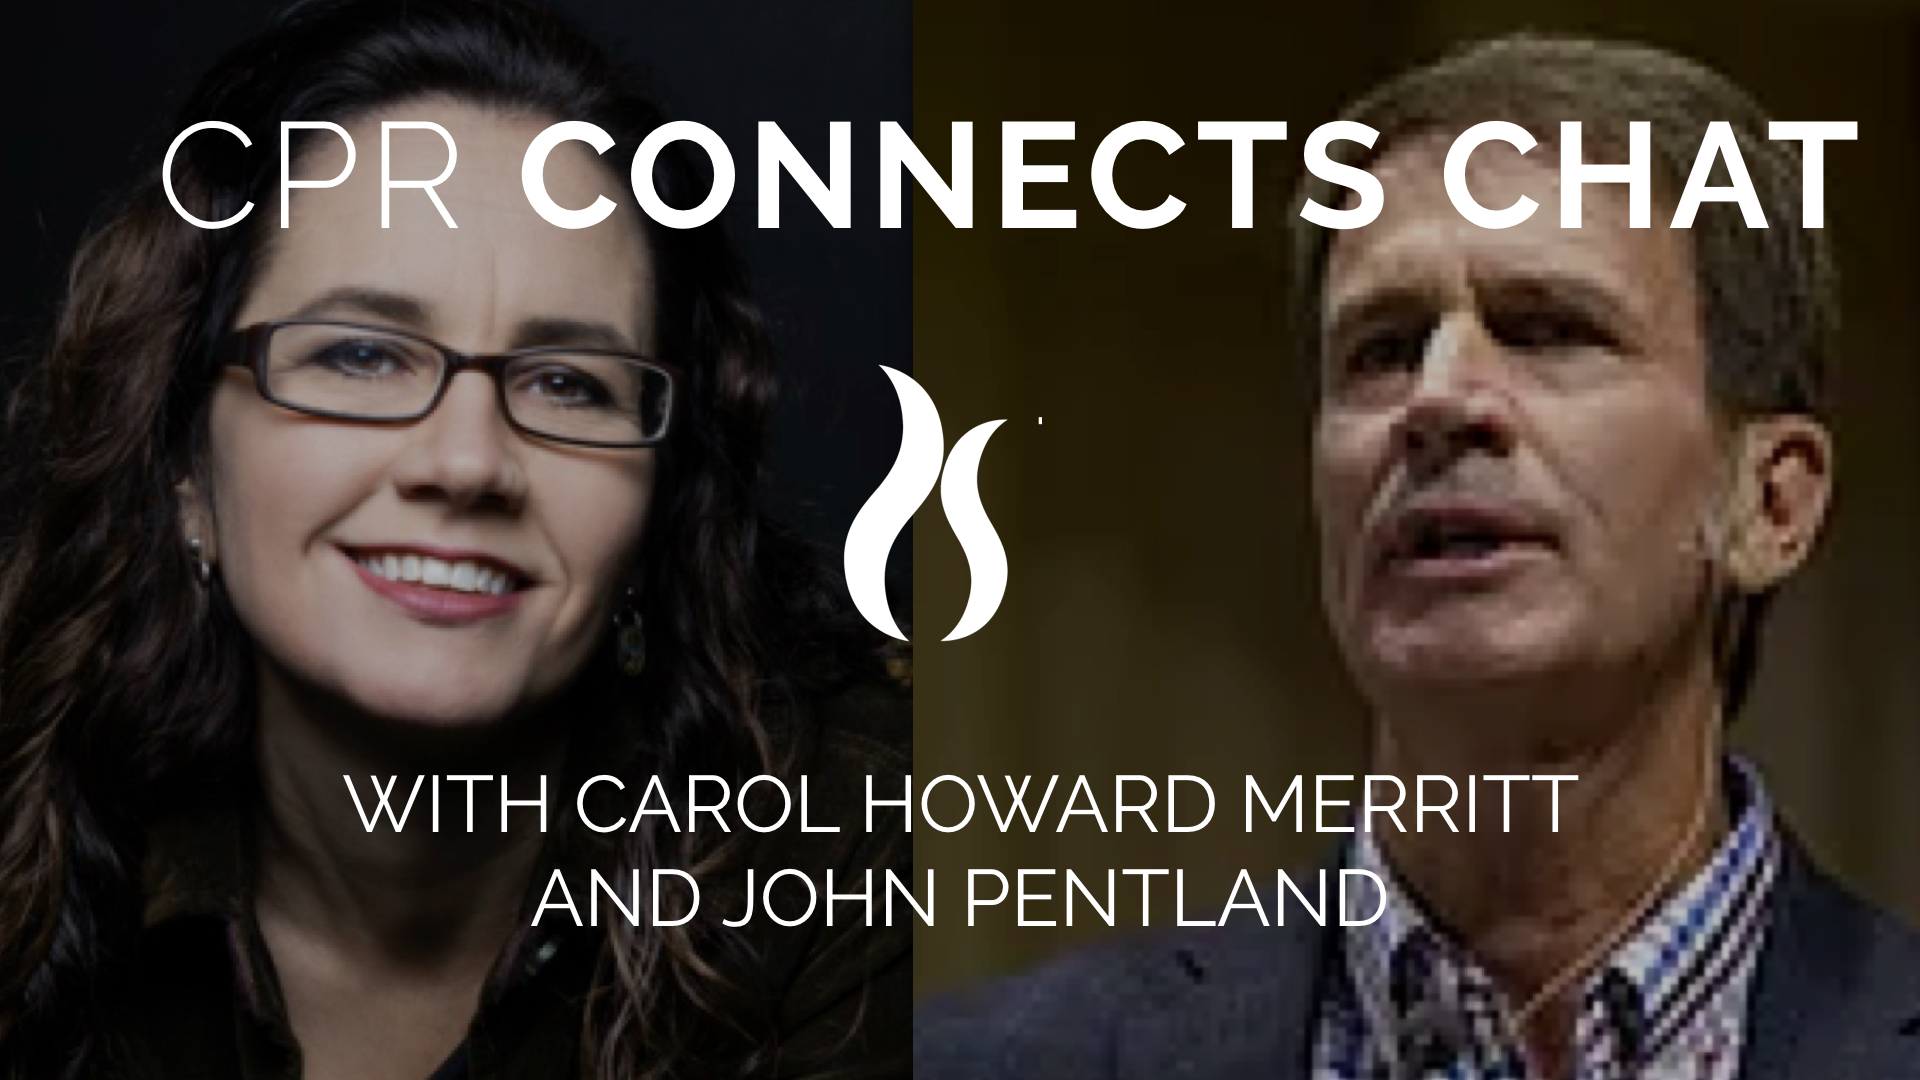  Join John and Carol Howard Merritt for a live web chat on March 31st at noon Eastern. Click here to RSVP. 